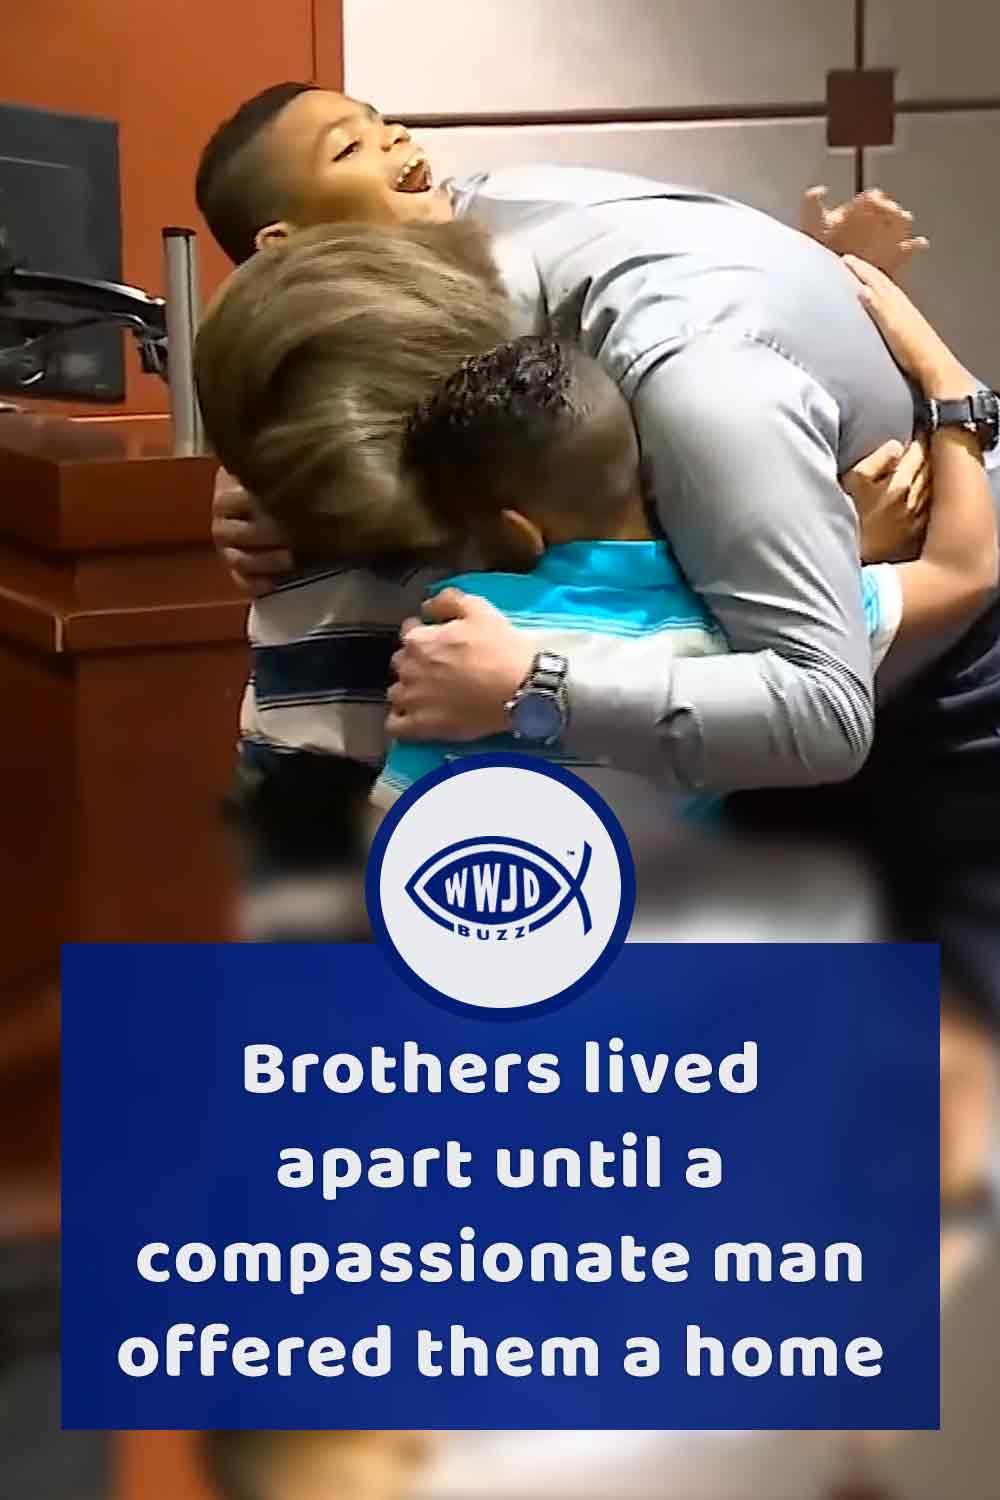 Brothers lived apart until a compassionate man offered them a home